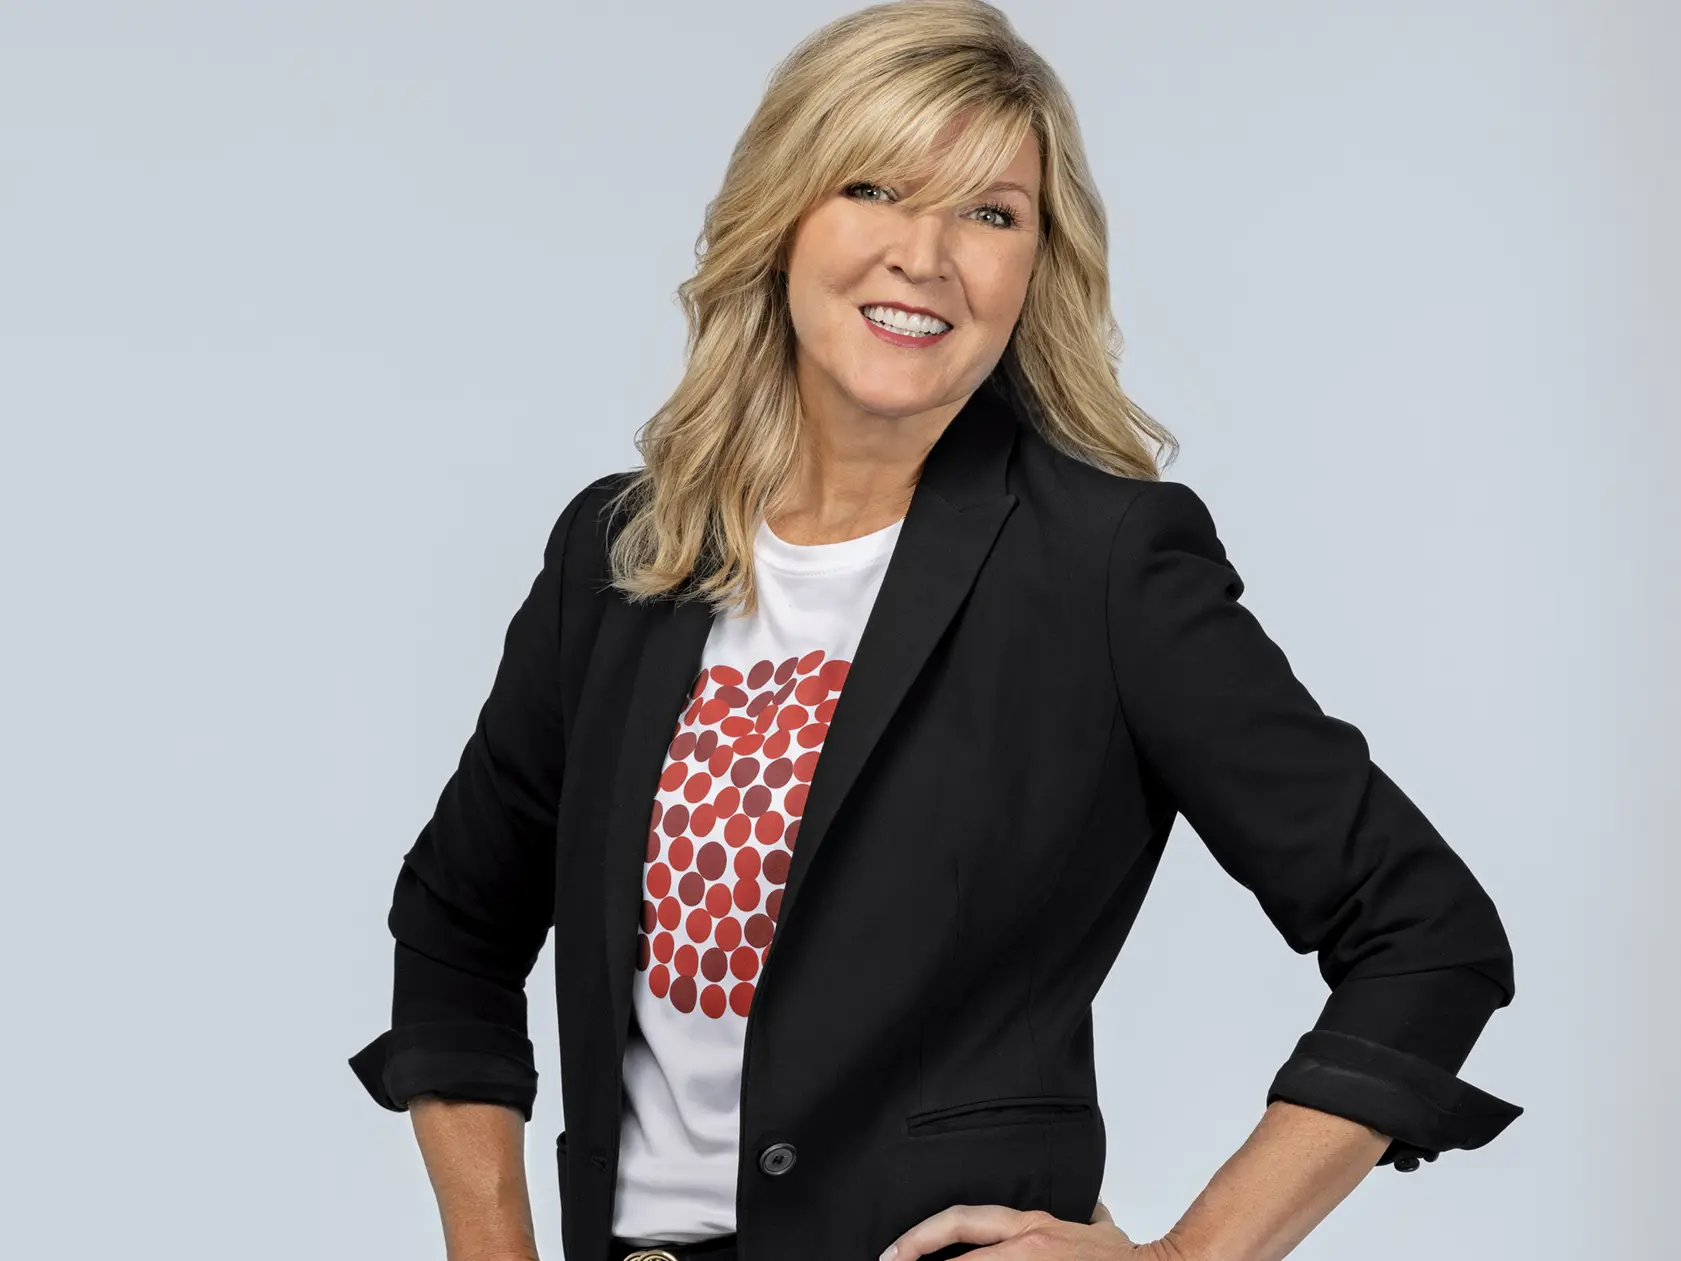 A white woman wears a pepperoni pizza T-shirt, under a black suit jacket, with black pants. She has blond hair, blue eyes, a big smile and stands confidently with her hands on hips. 